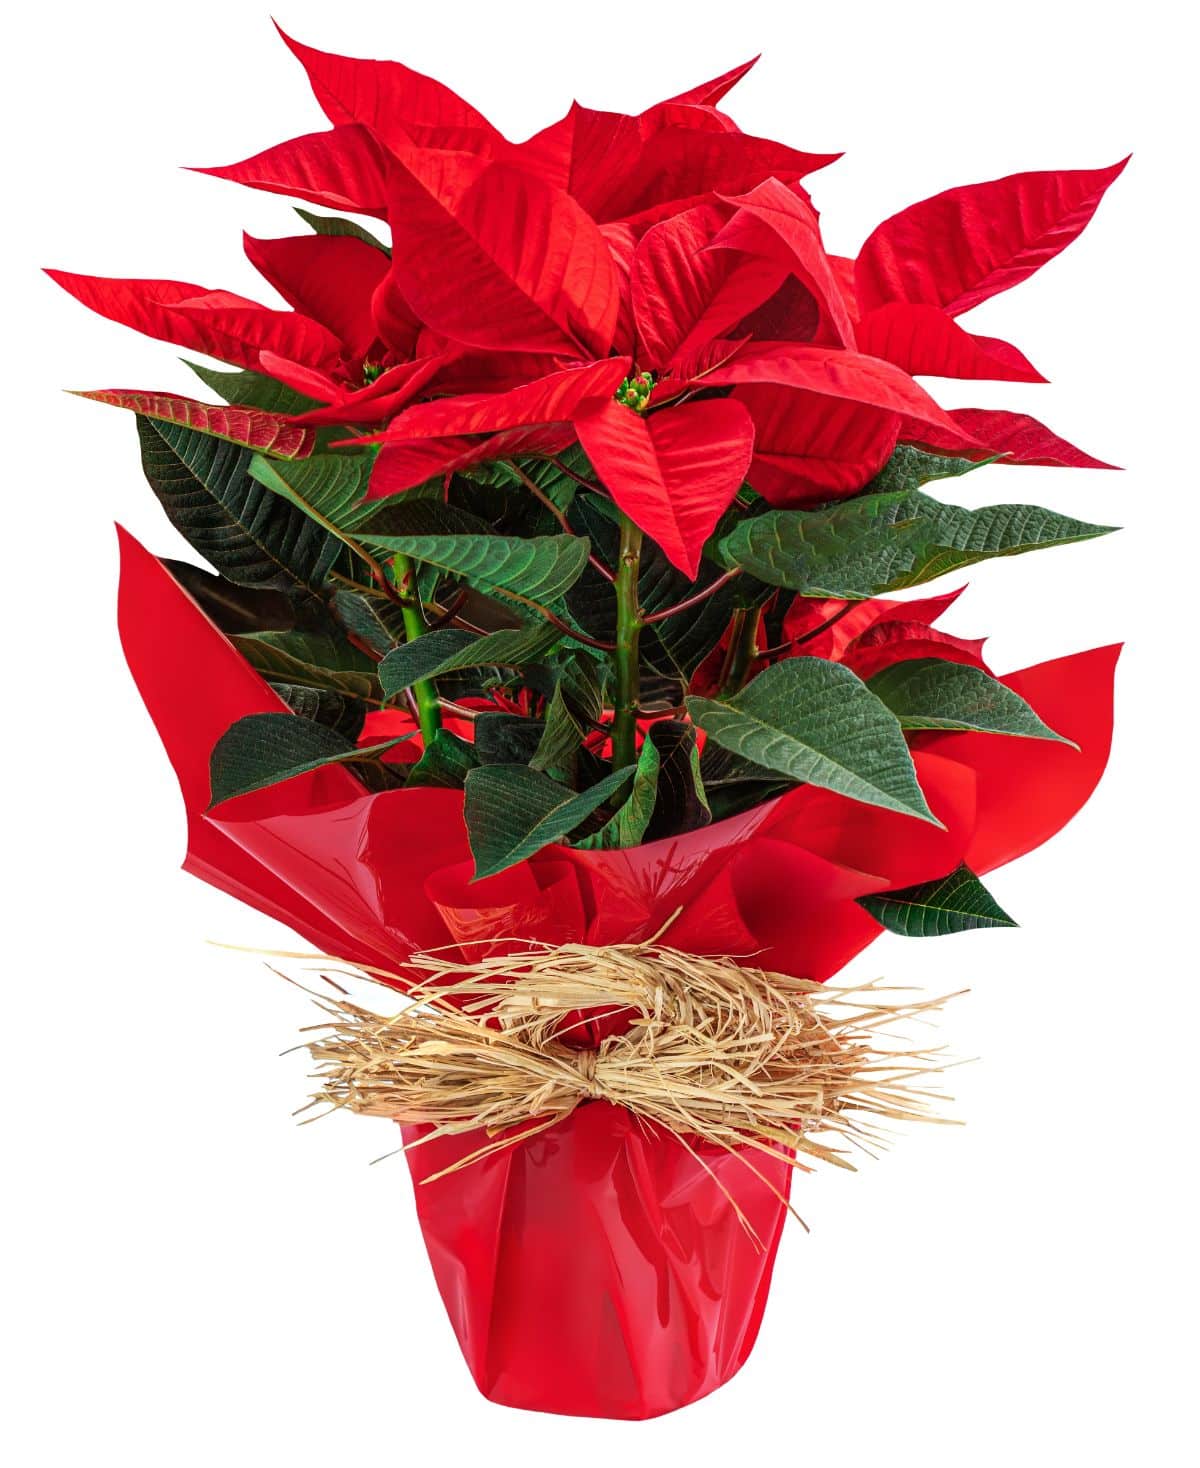 A nicely wrapped poinsettia plant with a pot cover that needs drainage holes.